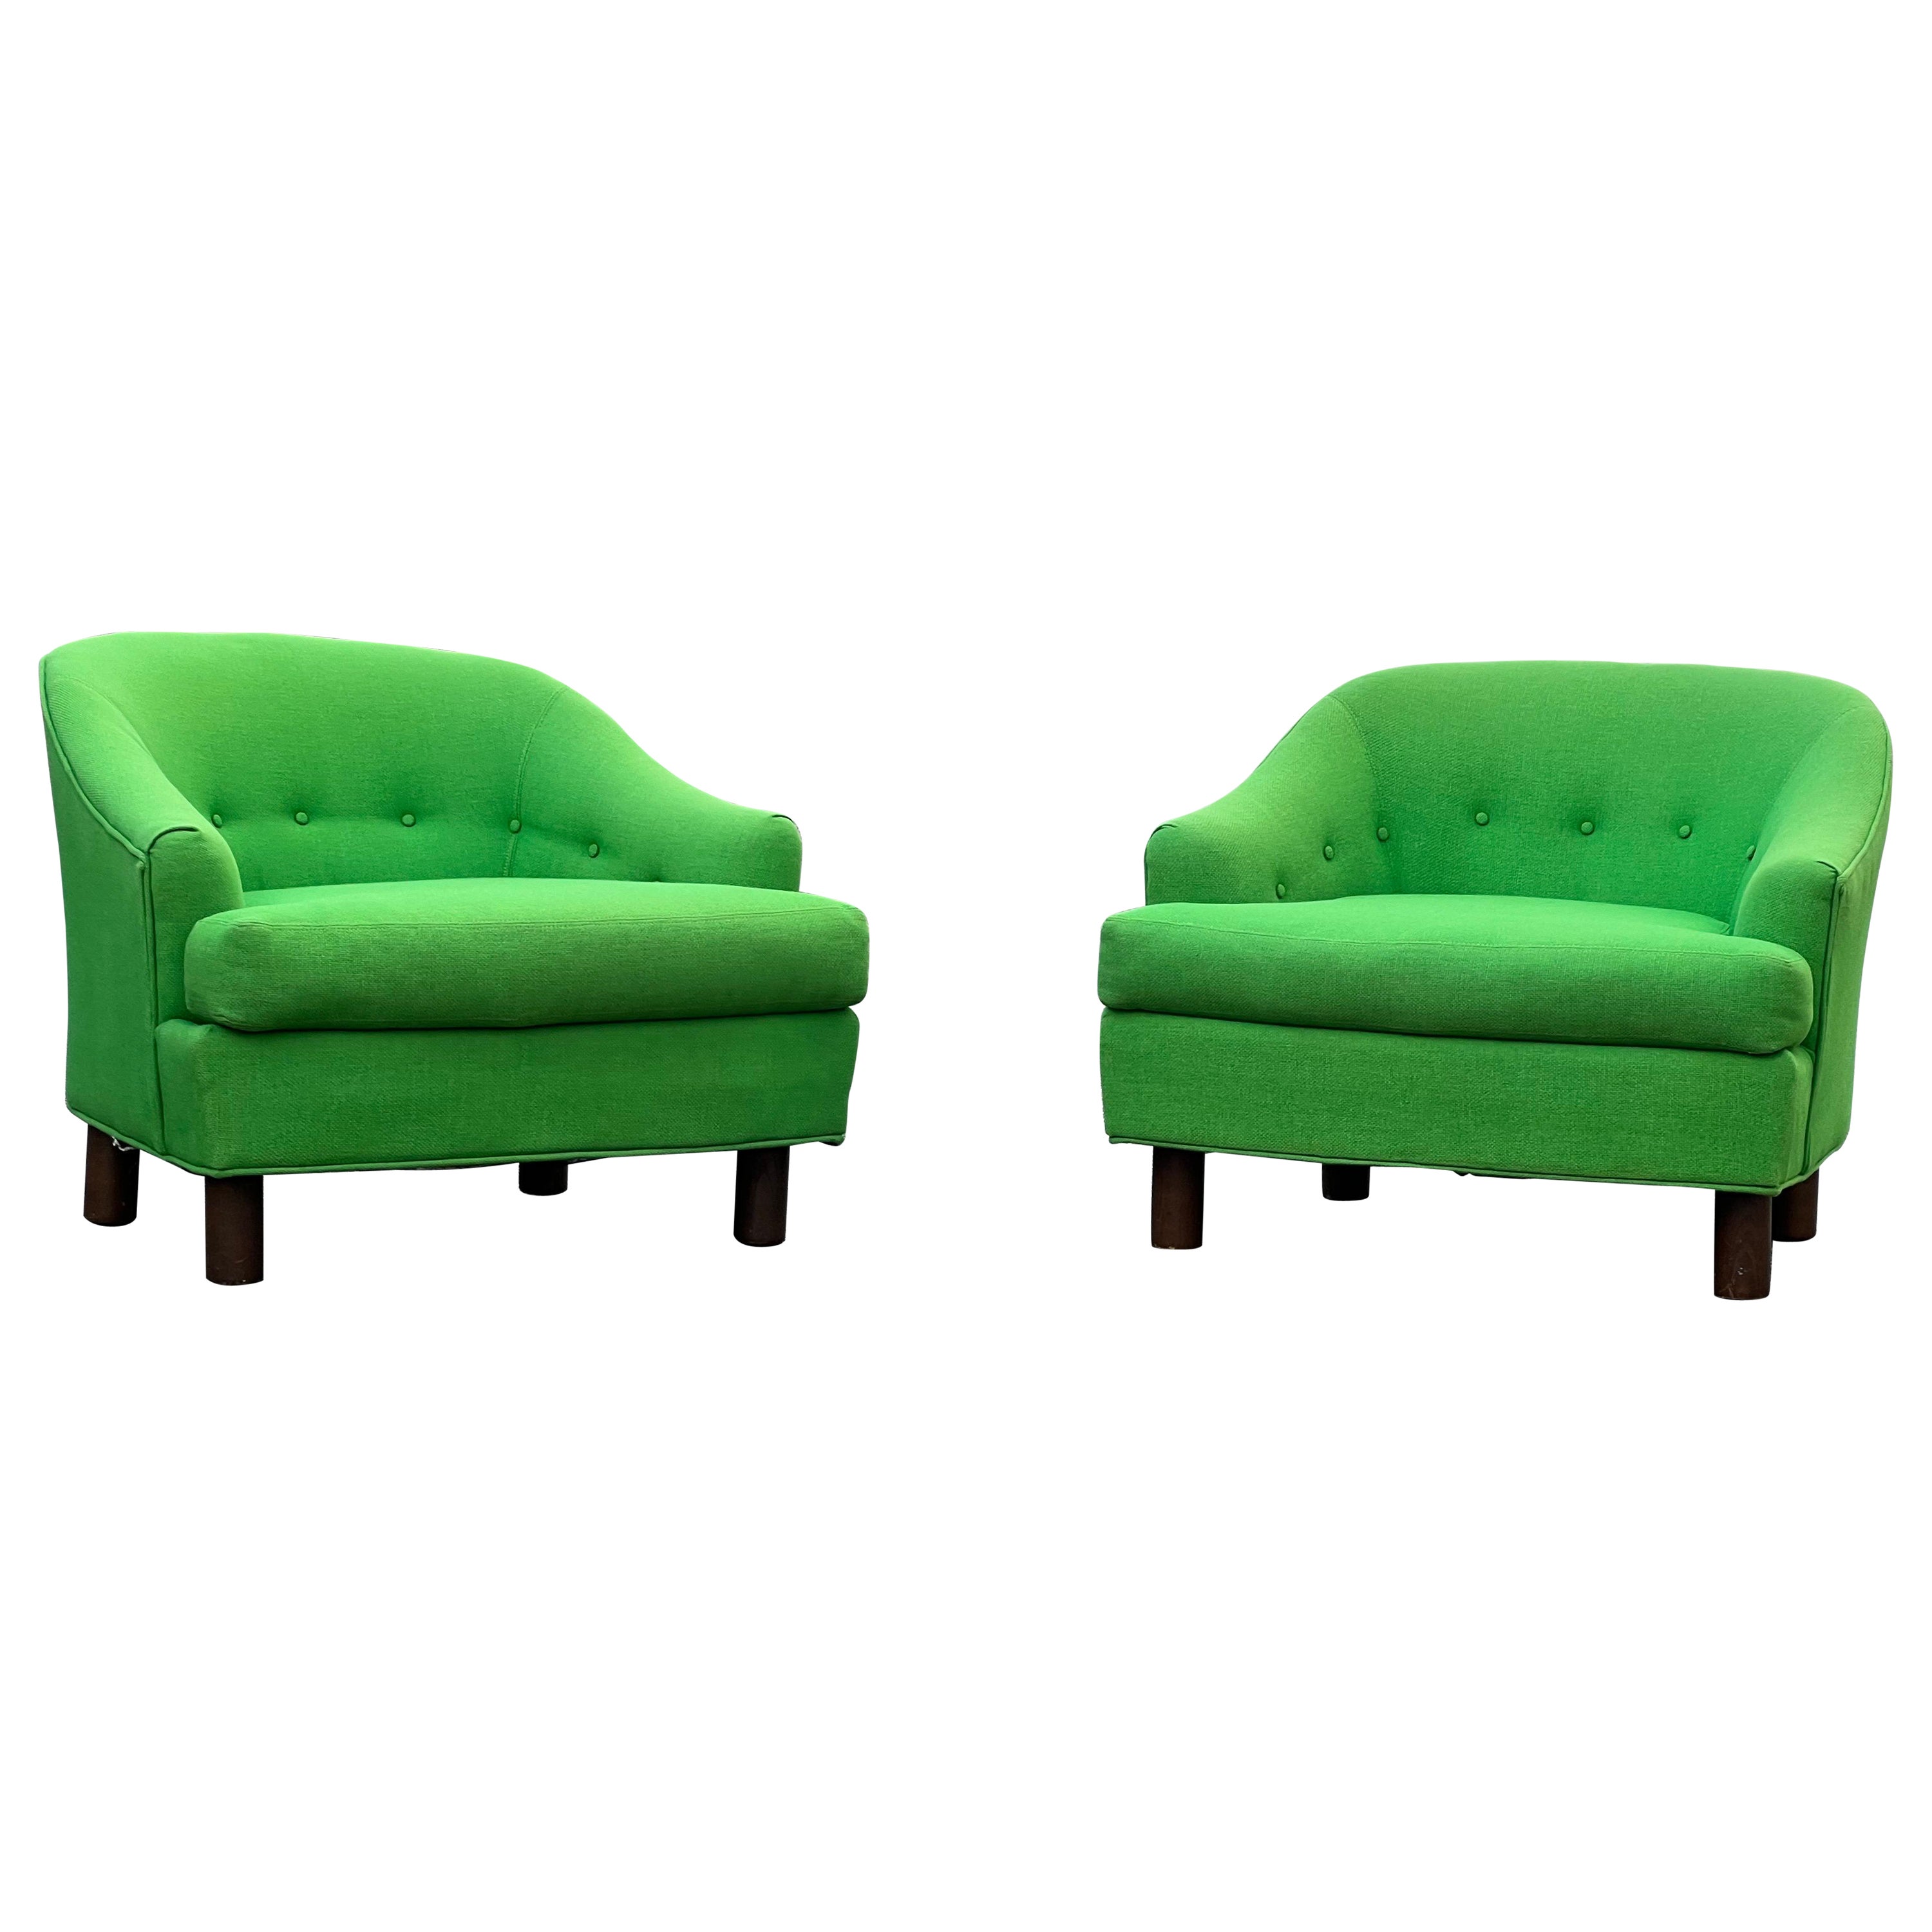 A pair of green mid-Century modern Monroe of selig barrel back chairs  For Sale